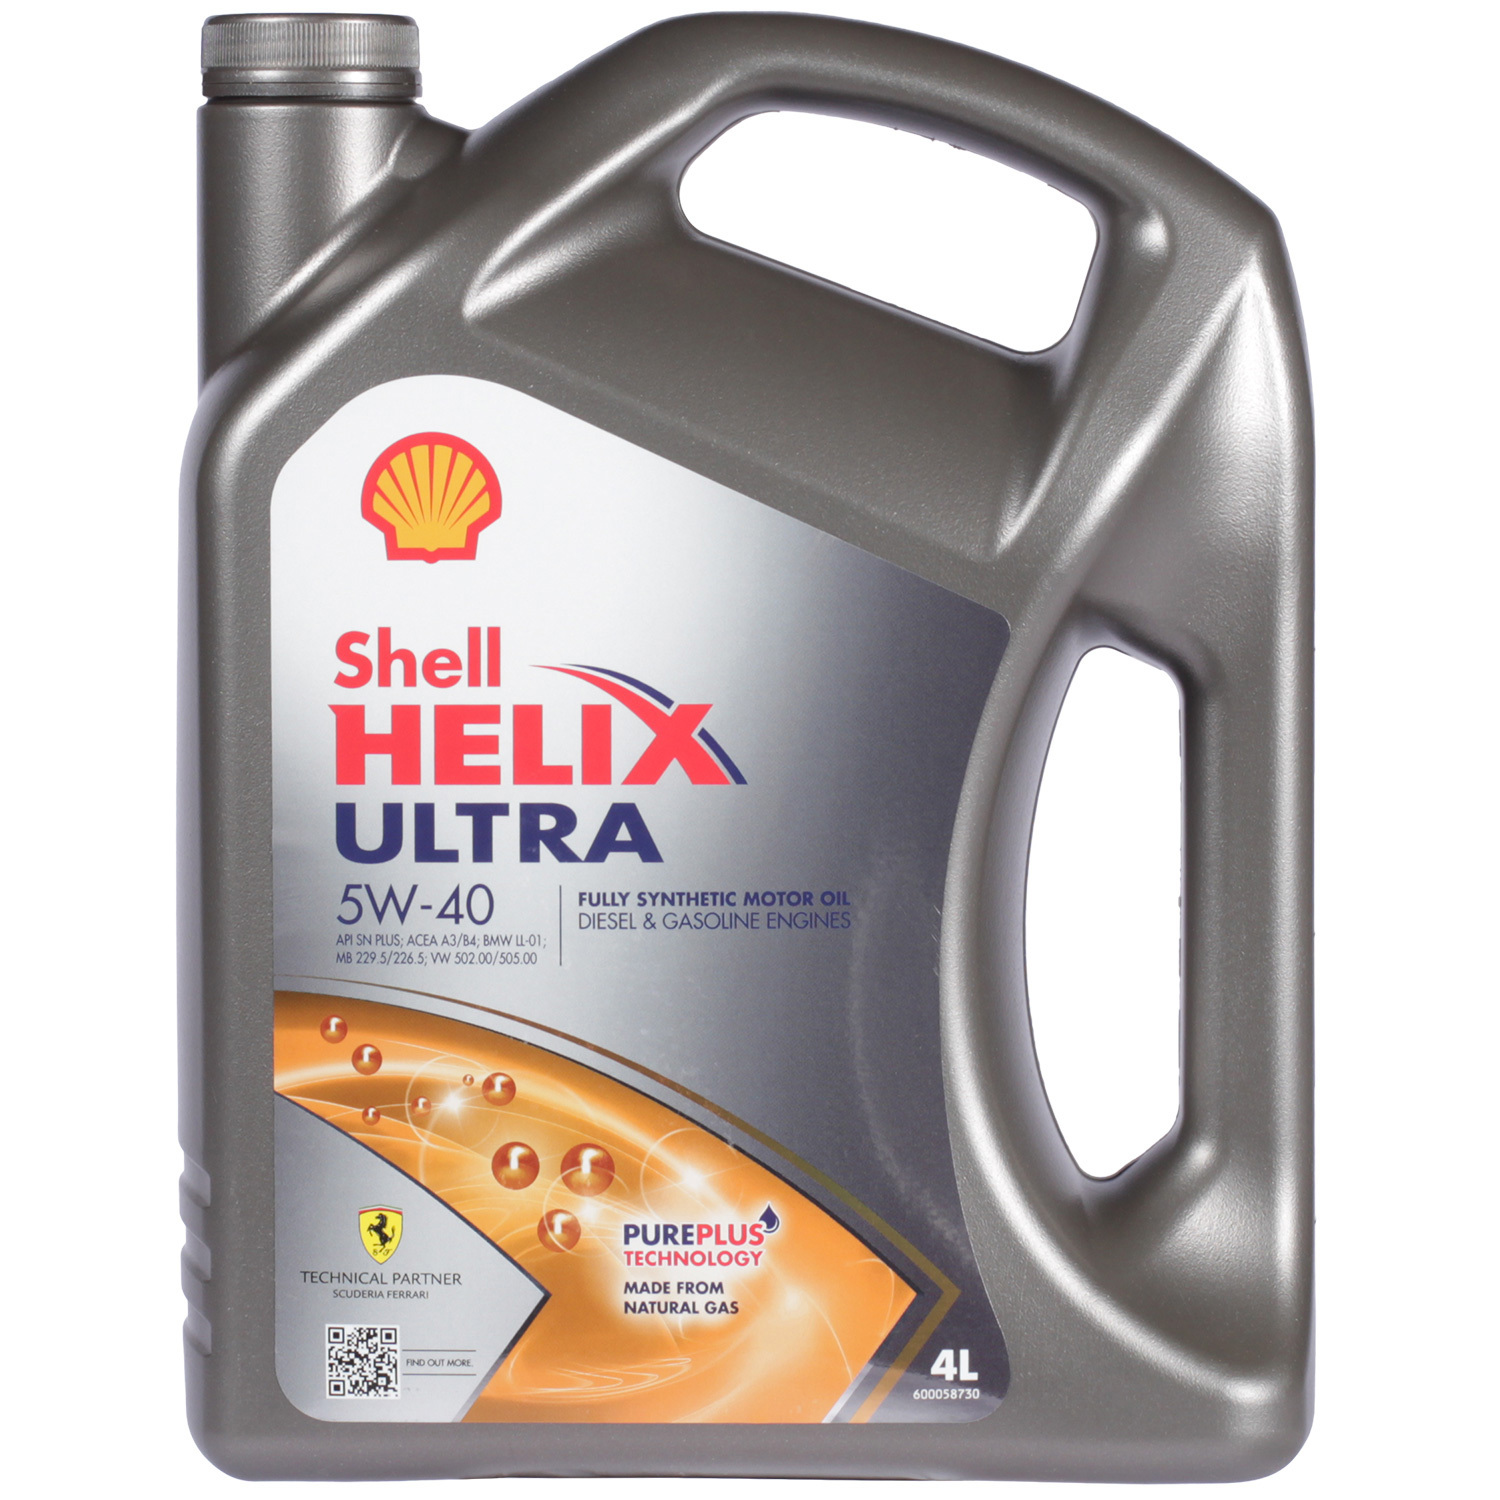 Shell Моторное масло Shell Helix Ultra 5W-40, 4 л масло моторное shell helix ultra 5w 40 1 л